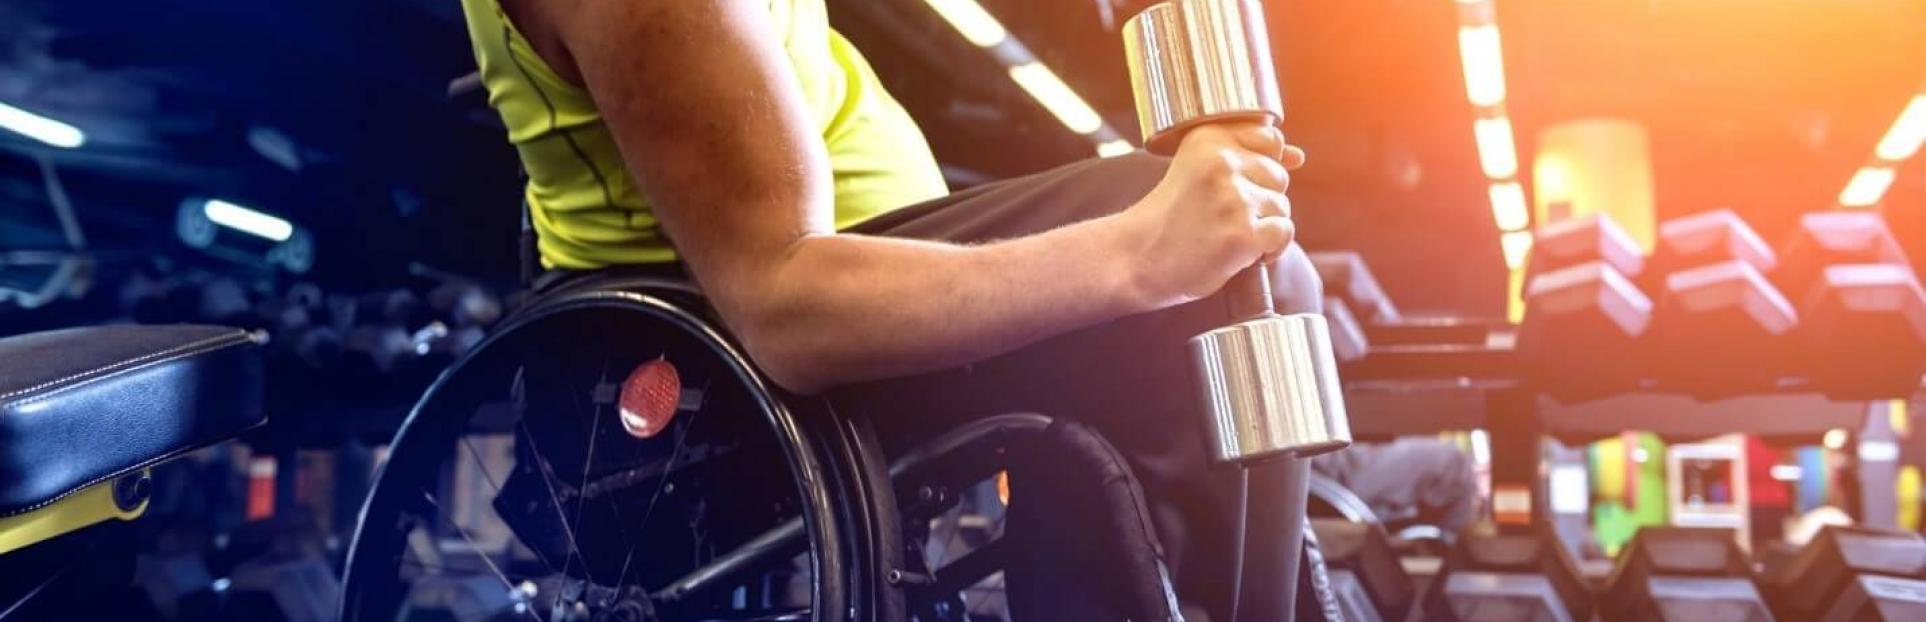 man in wheelchair lifting weight